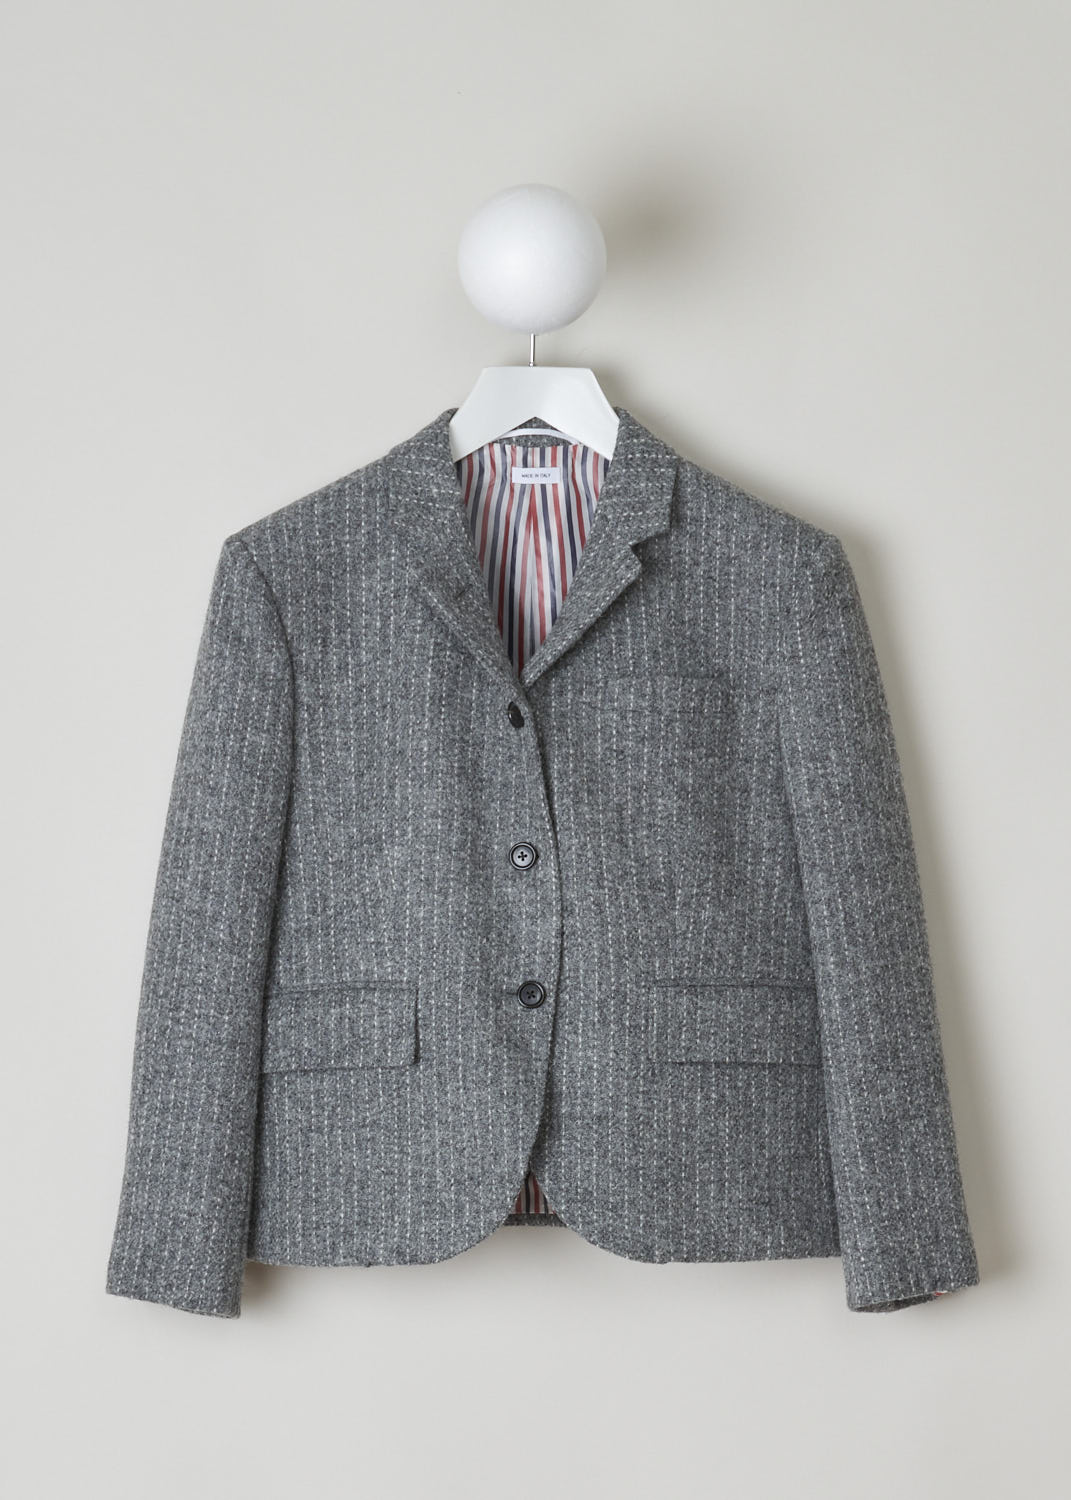 THOM BROWNE, GREY STRIPED TWEED BLAZER, FBC010V_06879_035_MED_GREY, Grey, Front, Grey tweed blazer with a horizontal stripe. This blazer features a notch lapel, a single chest pocket and two flap pockets and long cuffed sleeves with four buttons. Two buttons on the front are your fastening option on this blazer. This the back, the grosgrain tab can be found.
